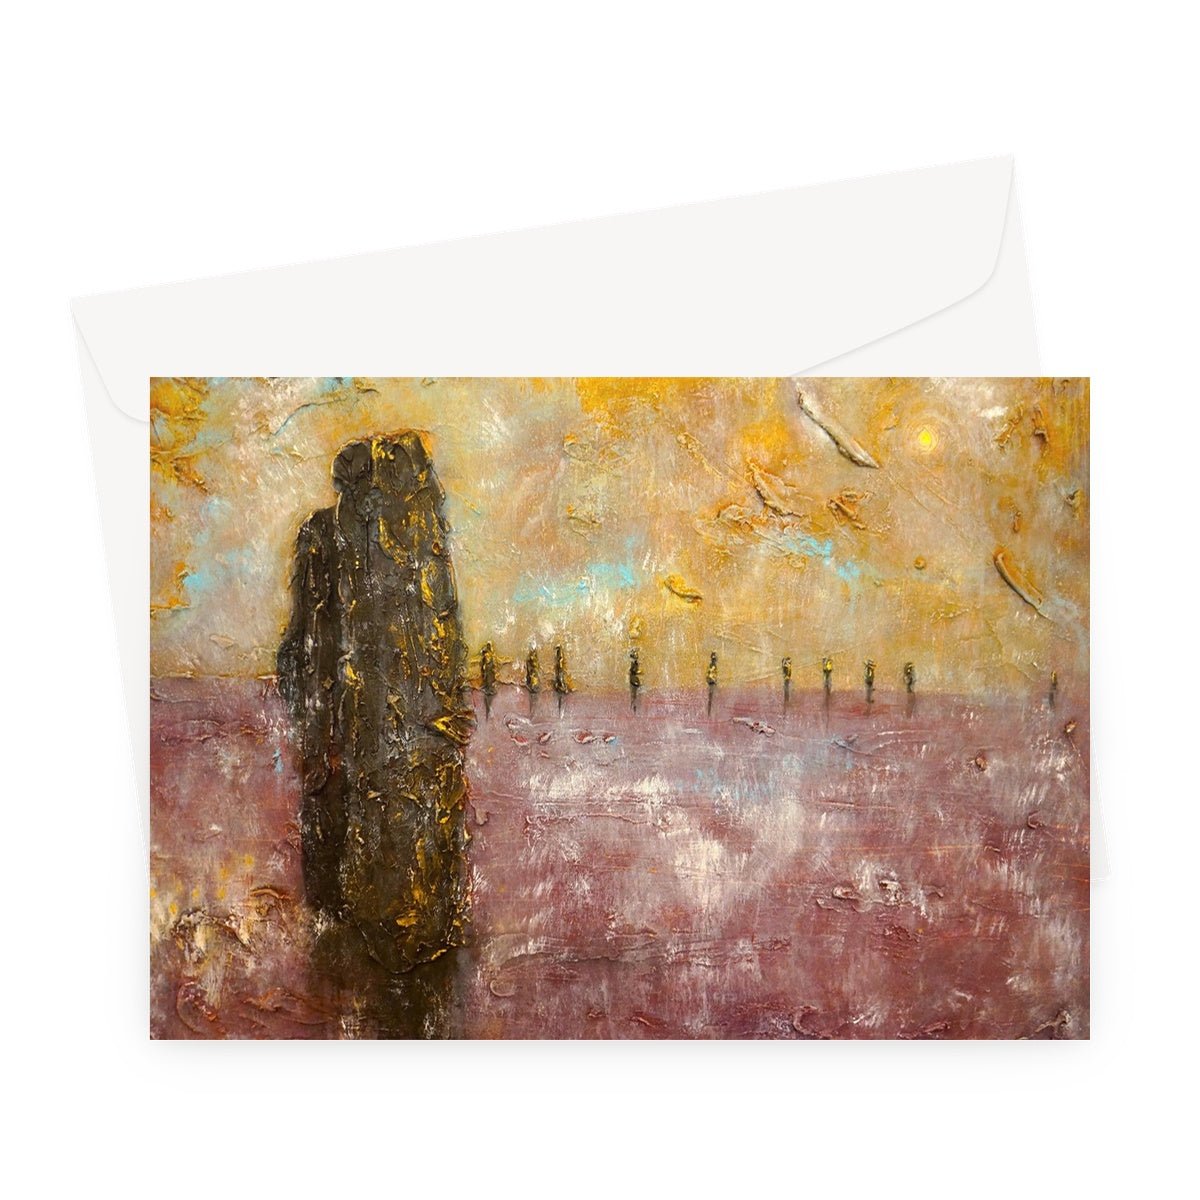 Bordgar Mist Orkney Art Gifts Greeting Card-Greetings Cards-Orkney Art Gallery-A5 Landscape-10 Cards-Paintings, Prints, Homeware, Art Gifts From Scotland By Scottish Artist Kevin Hunter